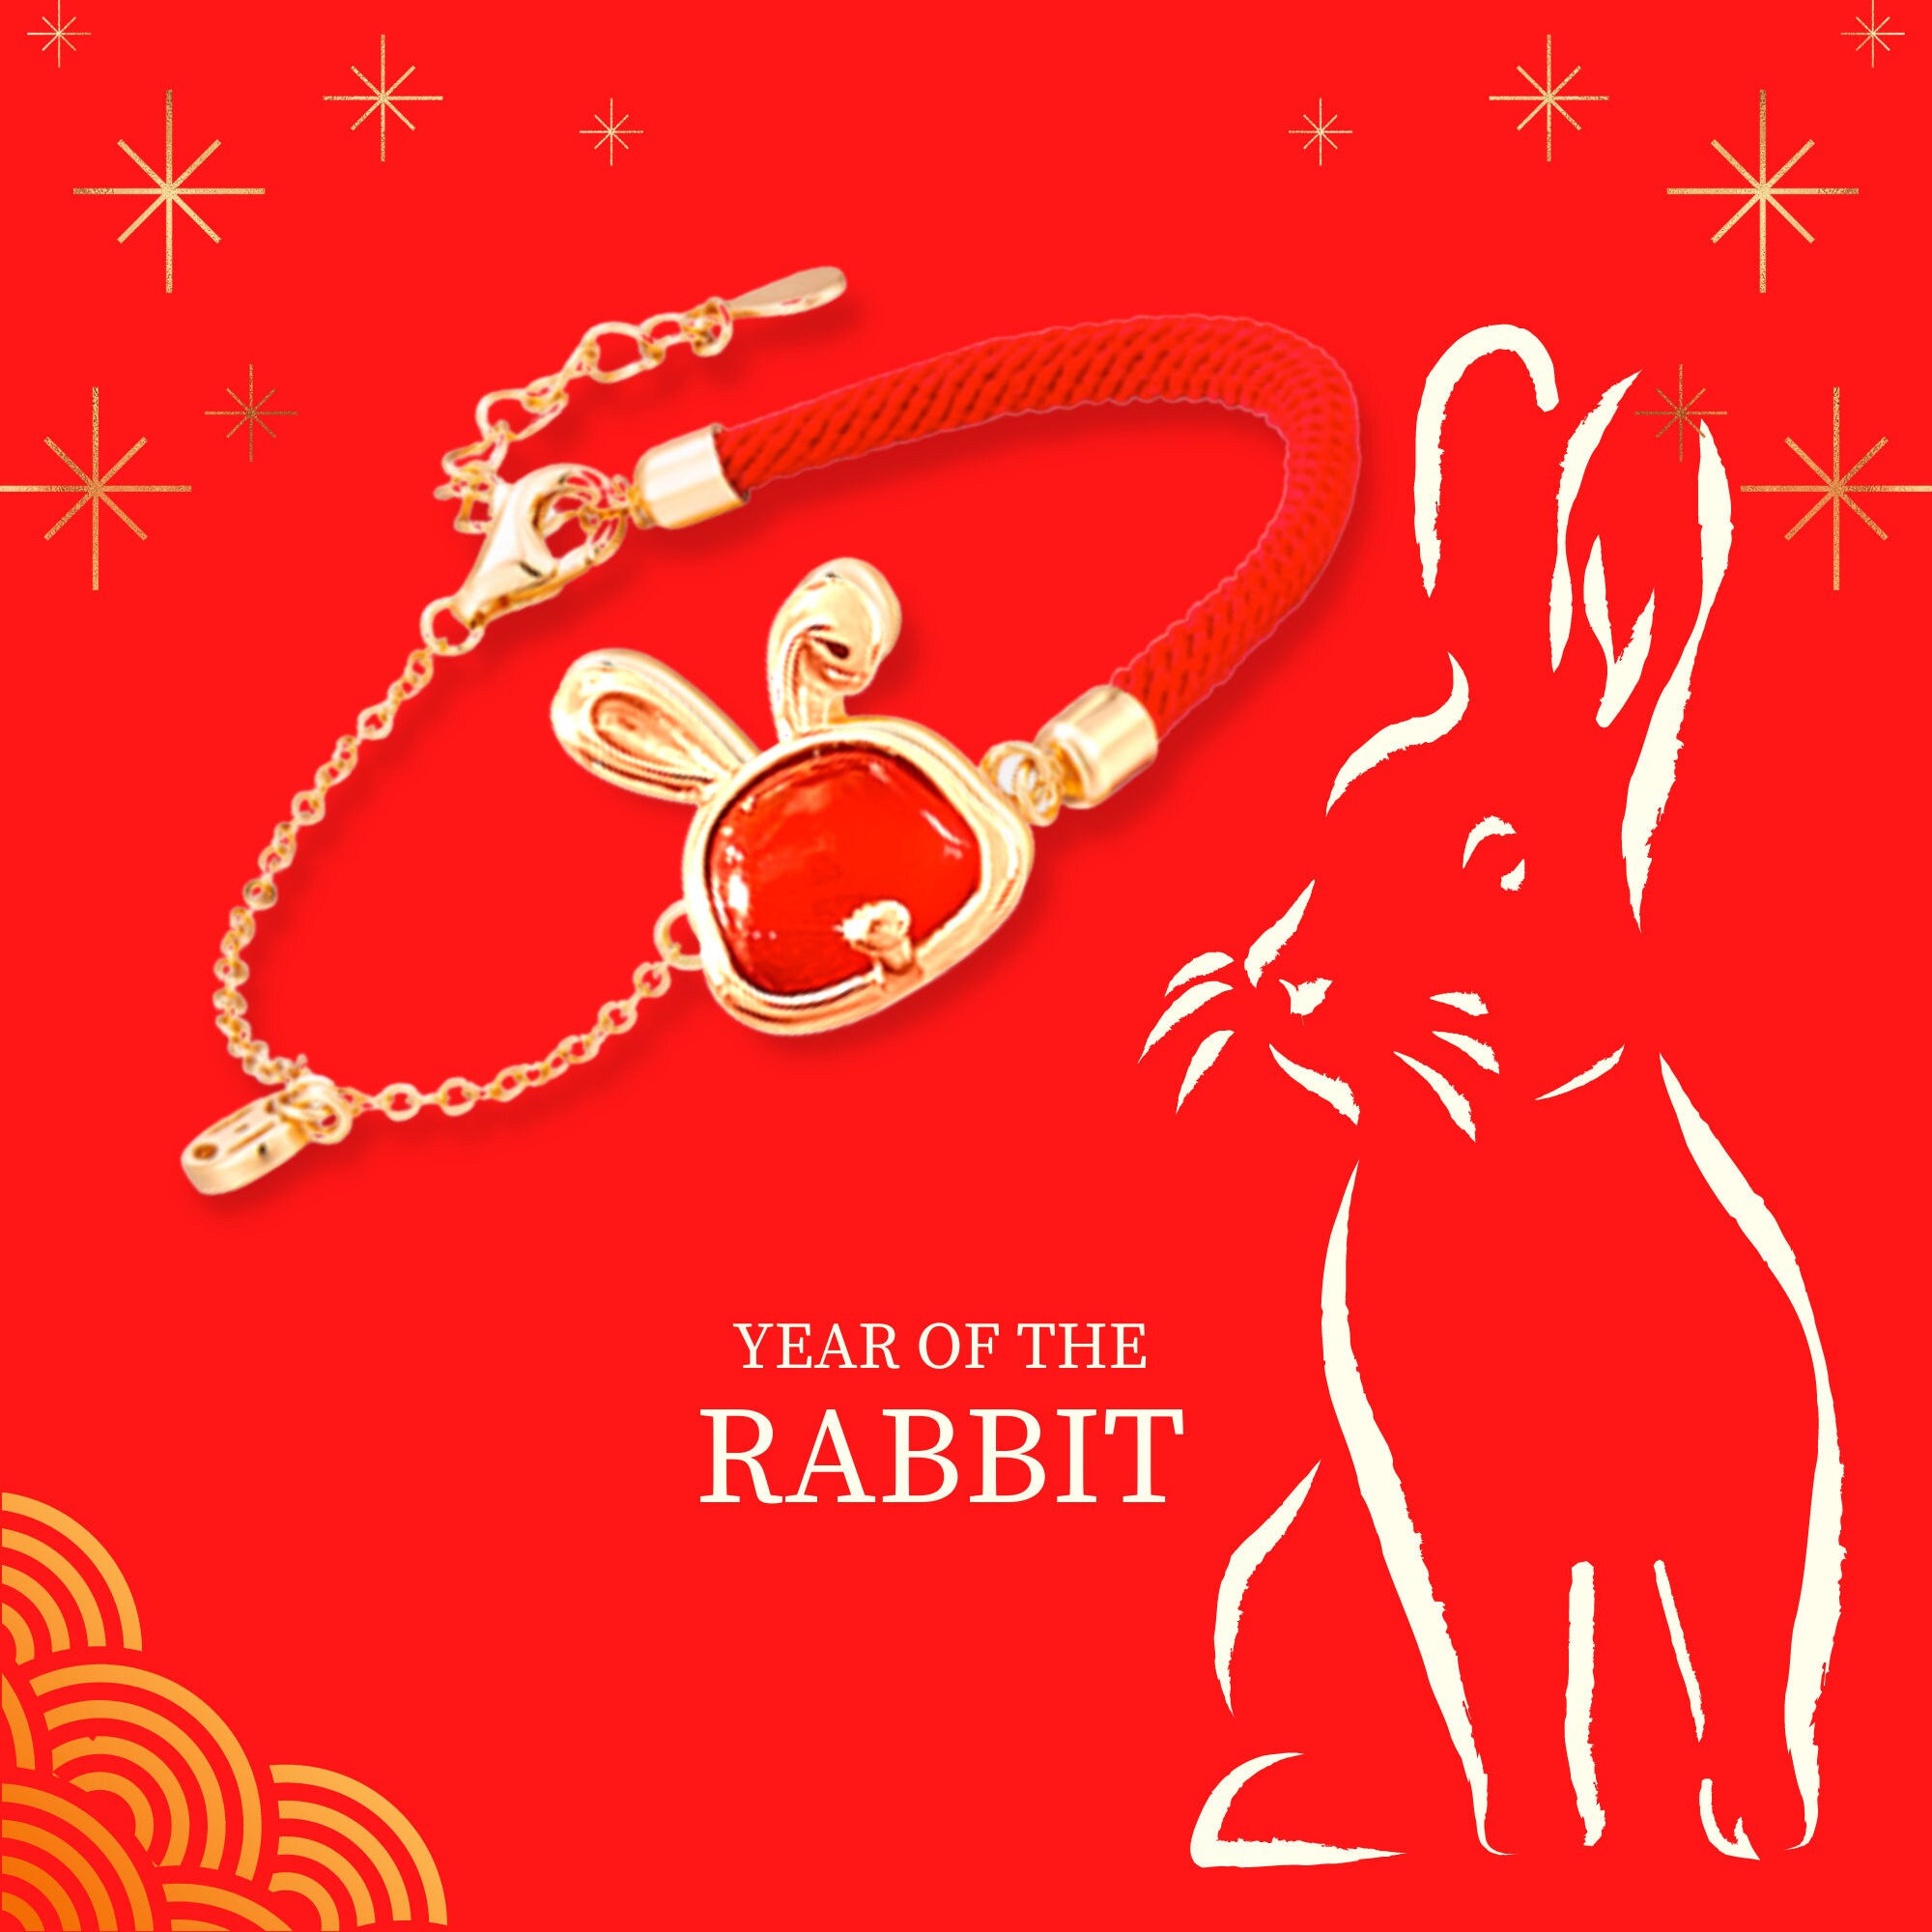 NEW COLLECTION LOUIS VUITTON BUNNY CHARM BRACELET/LUNAR NEW YEAR